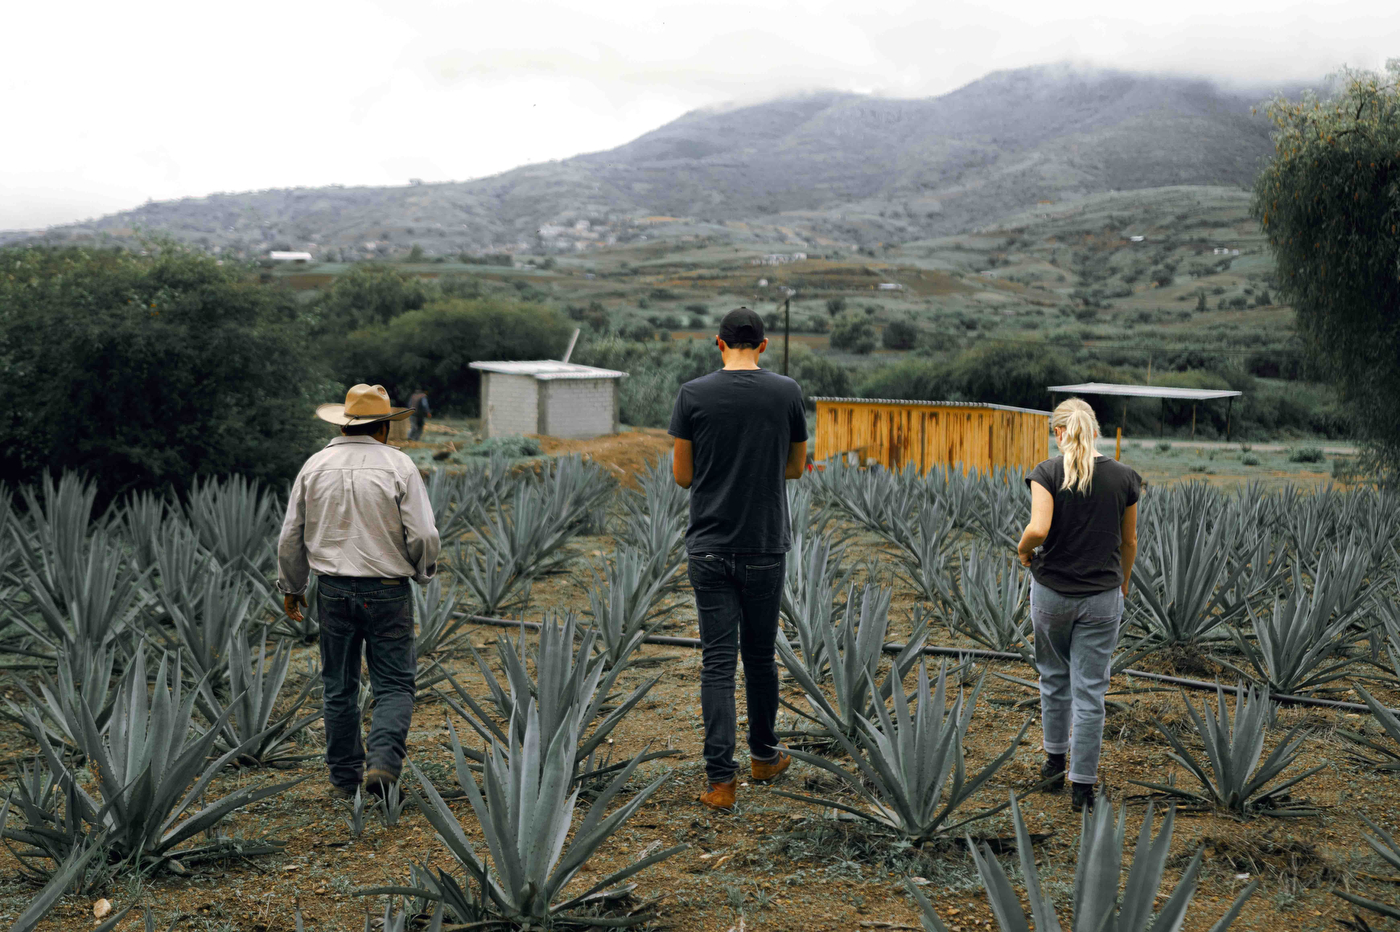 Jessica Pogranyi and Miguel Albarran walking through agave field